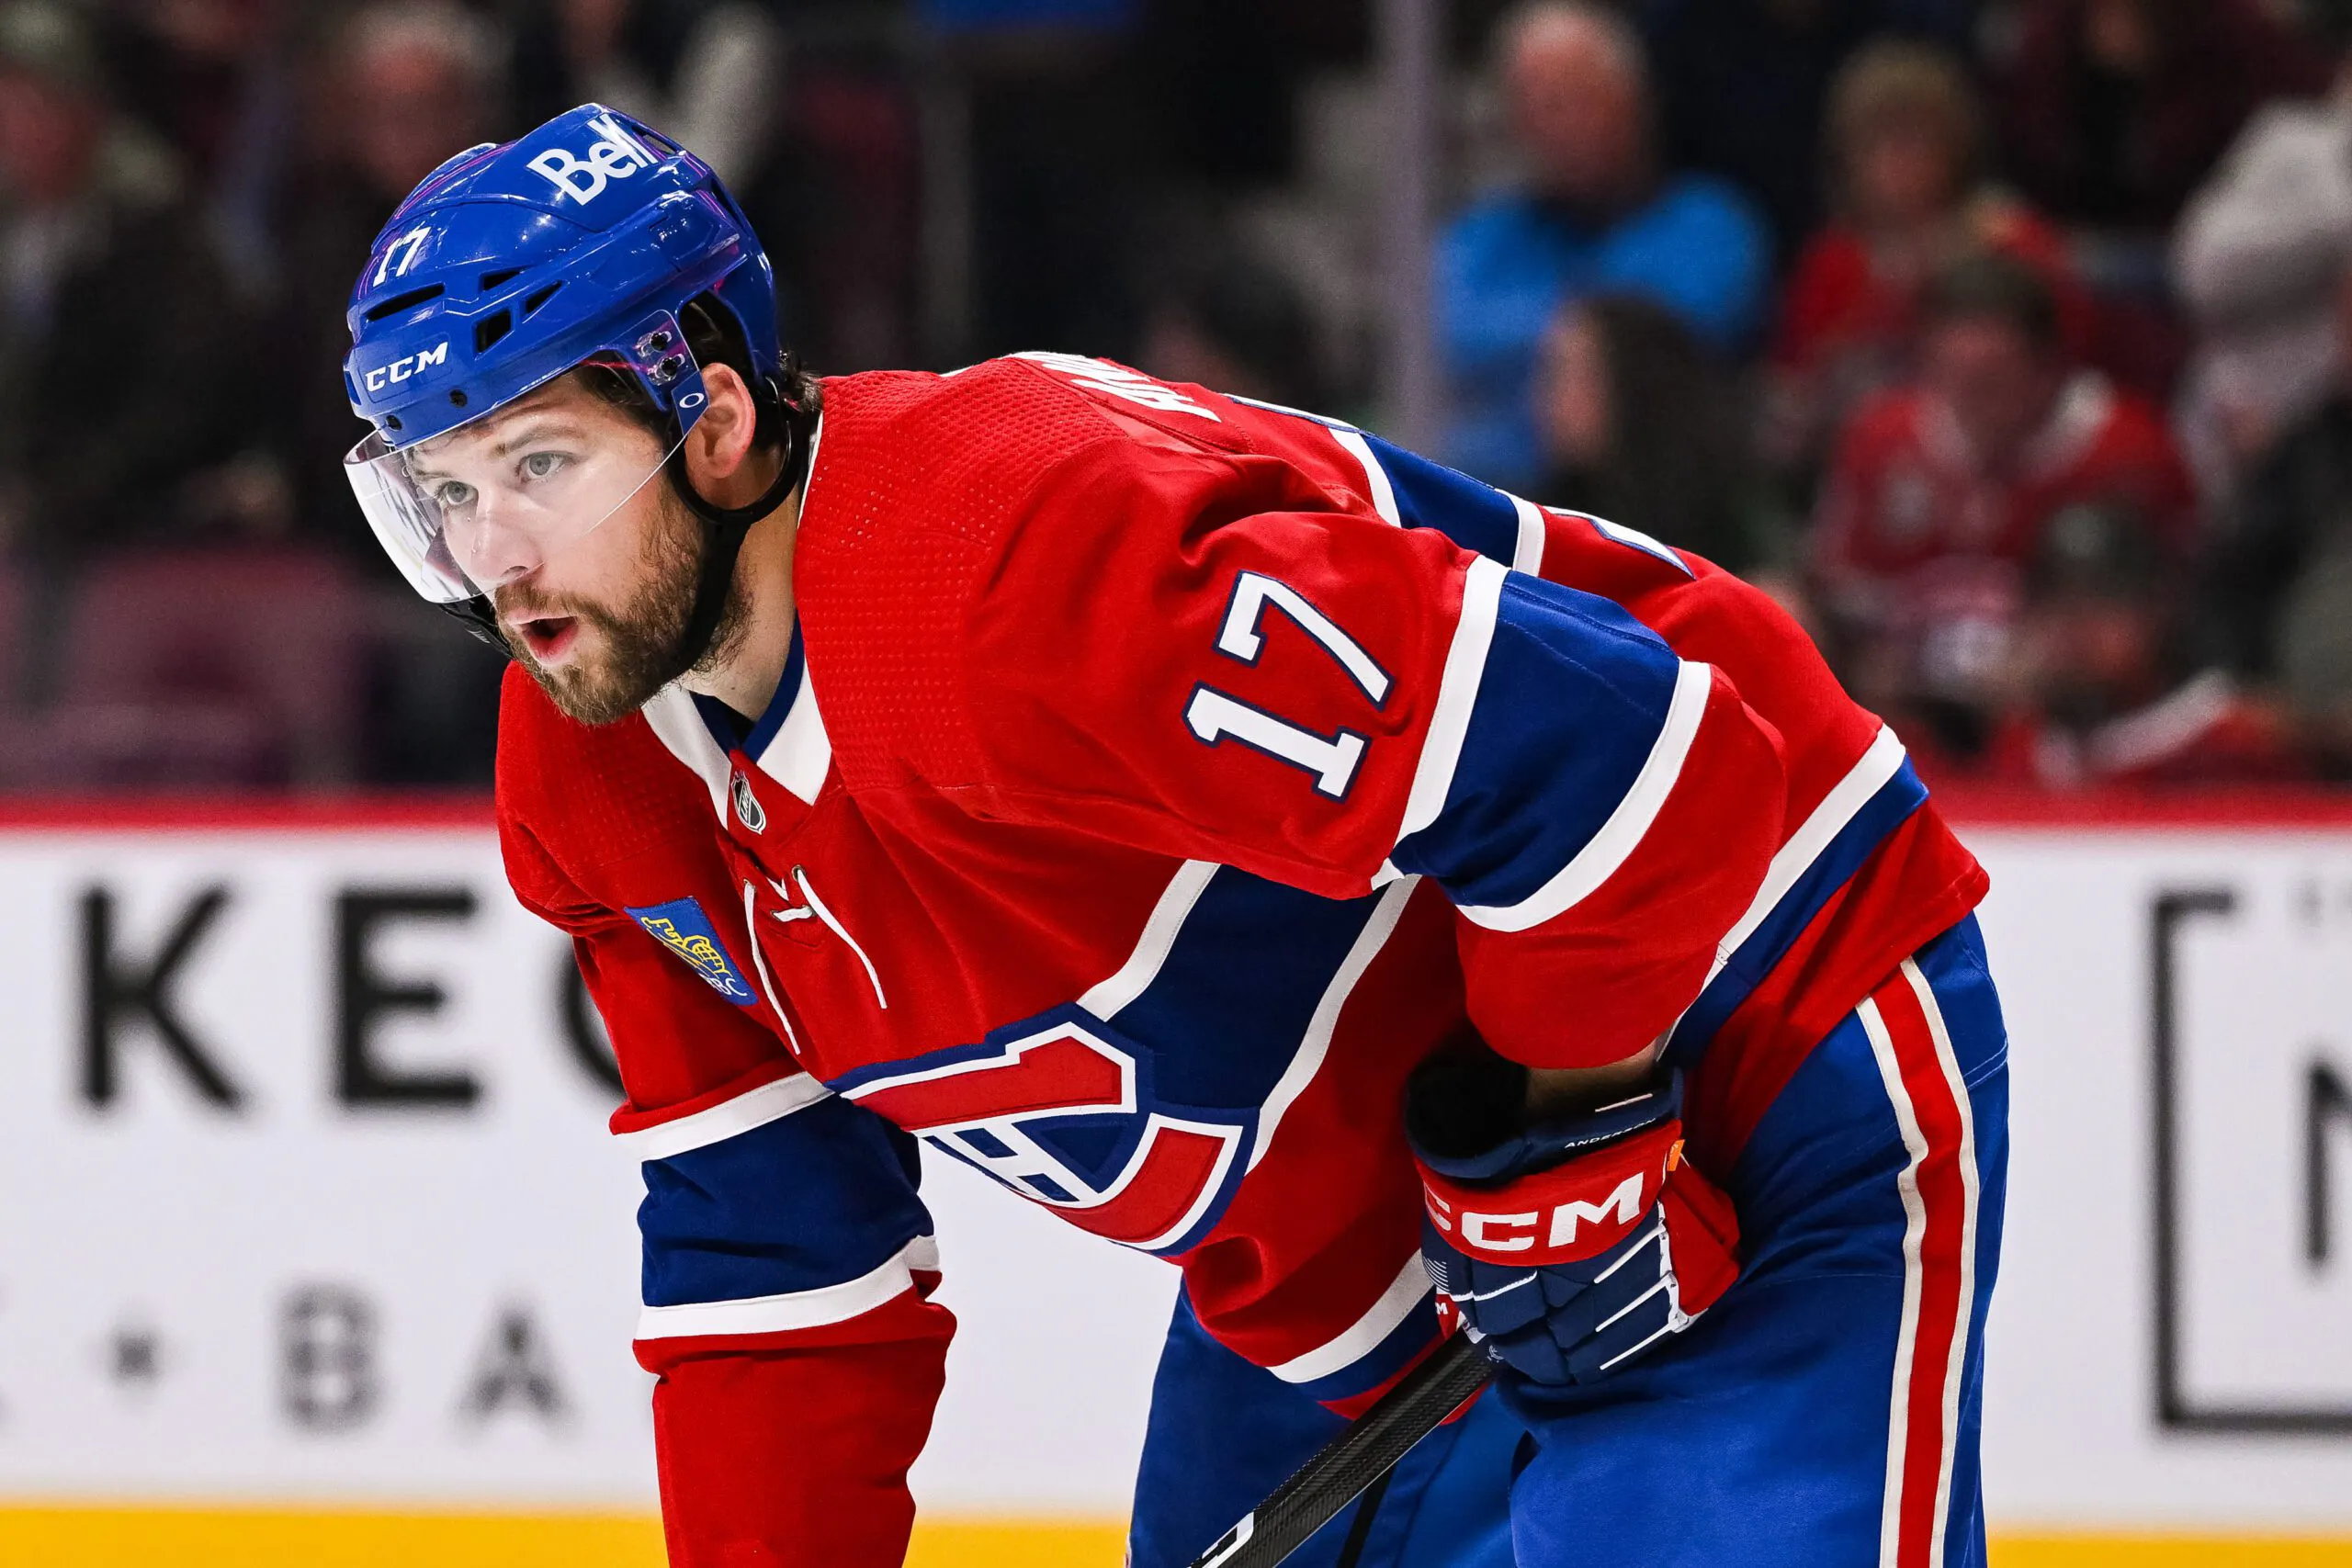 Montreal Canadiens’ forward Josh Anderson suspended two games for boarding